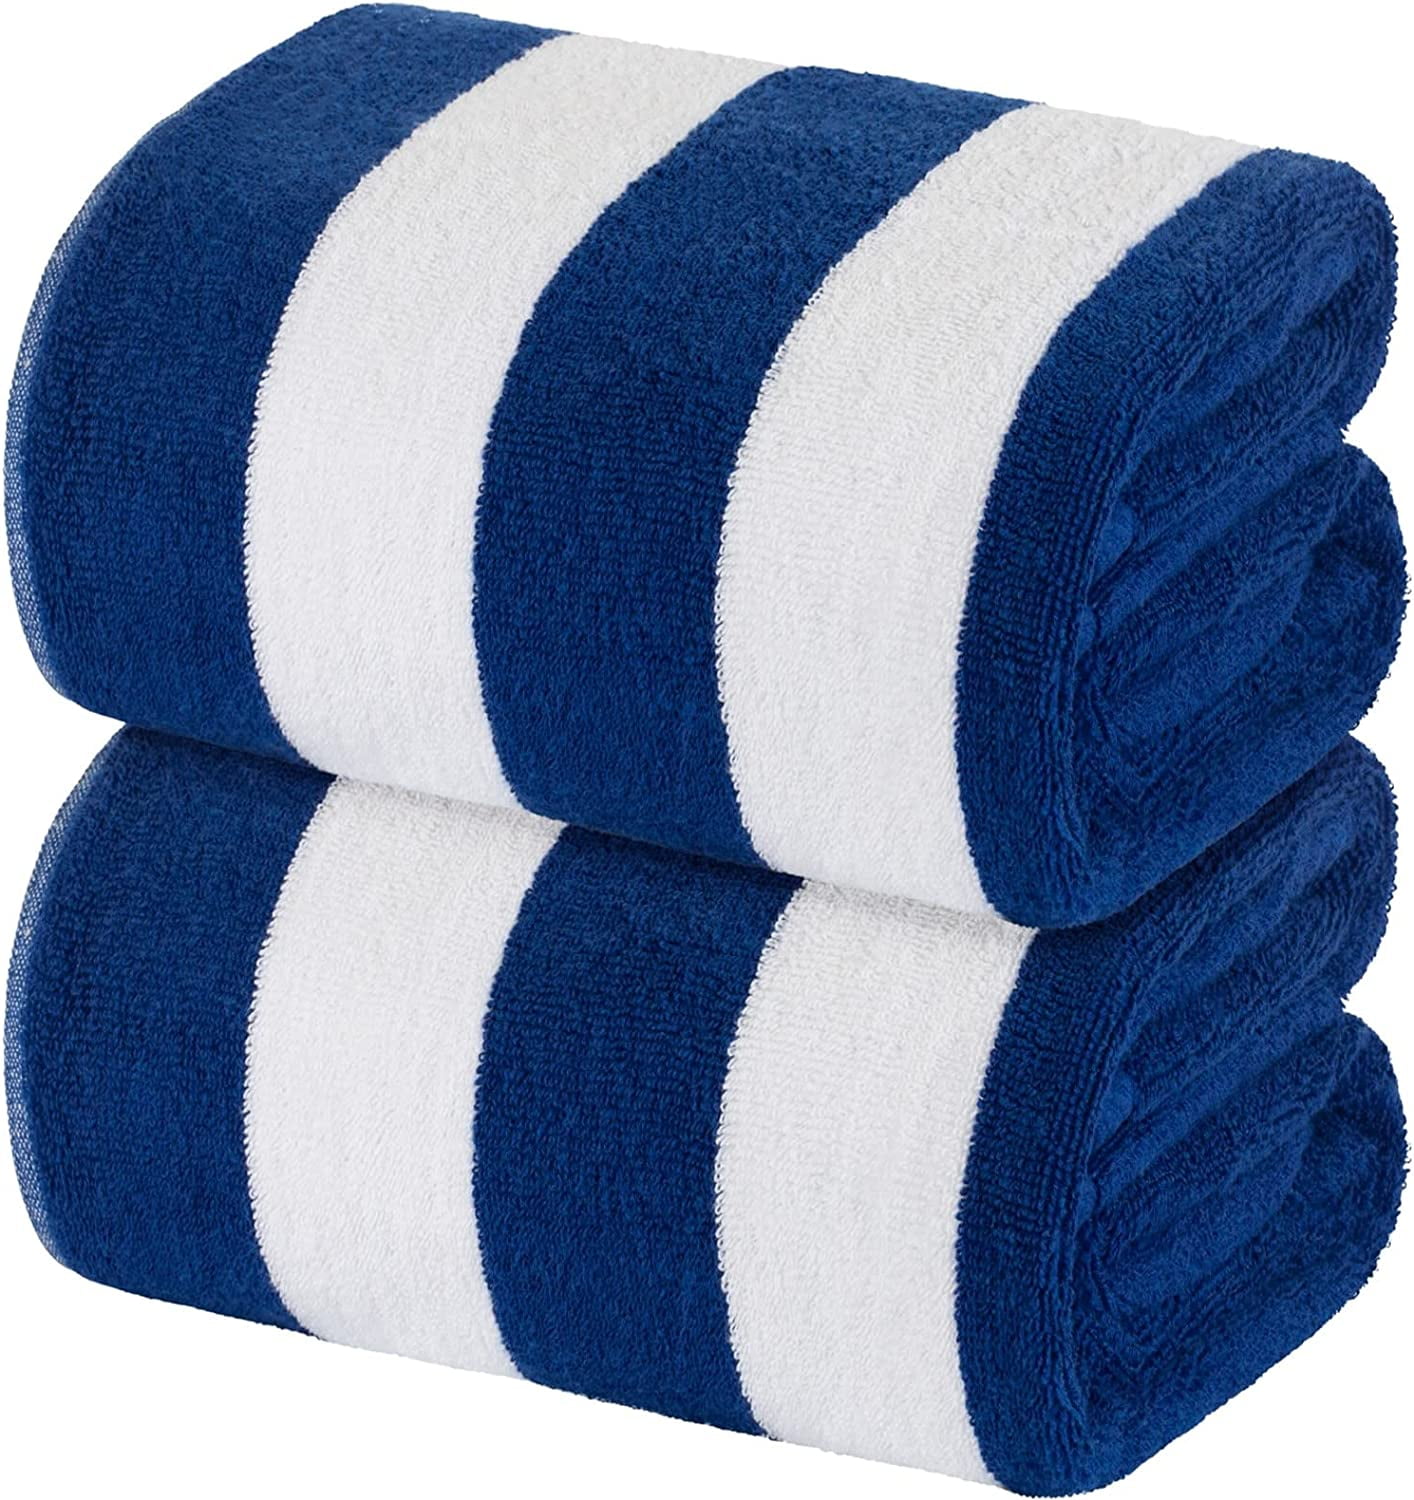 4 Piece Navy Stripe Large Bath Towels Set Oversized Bath Sheet Super Soft  Breathable Jumbo Bathroom Towels Highly Absorbent Shower Towel Quick Dry  Beach Chair Towel Spa Gym Hotel Towel Set